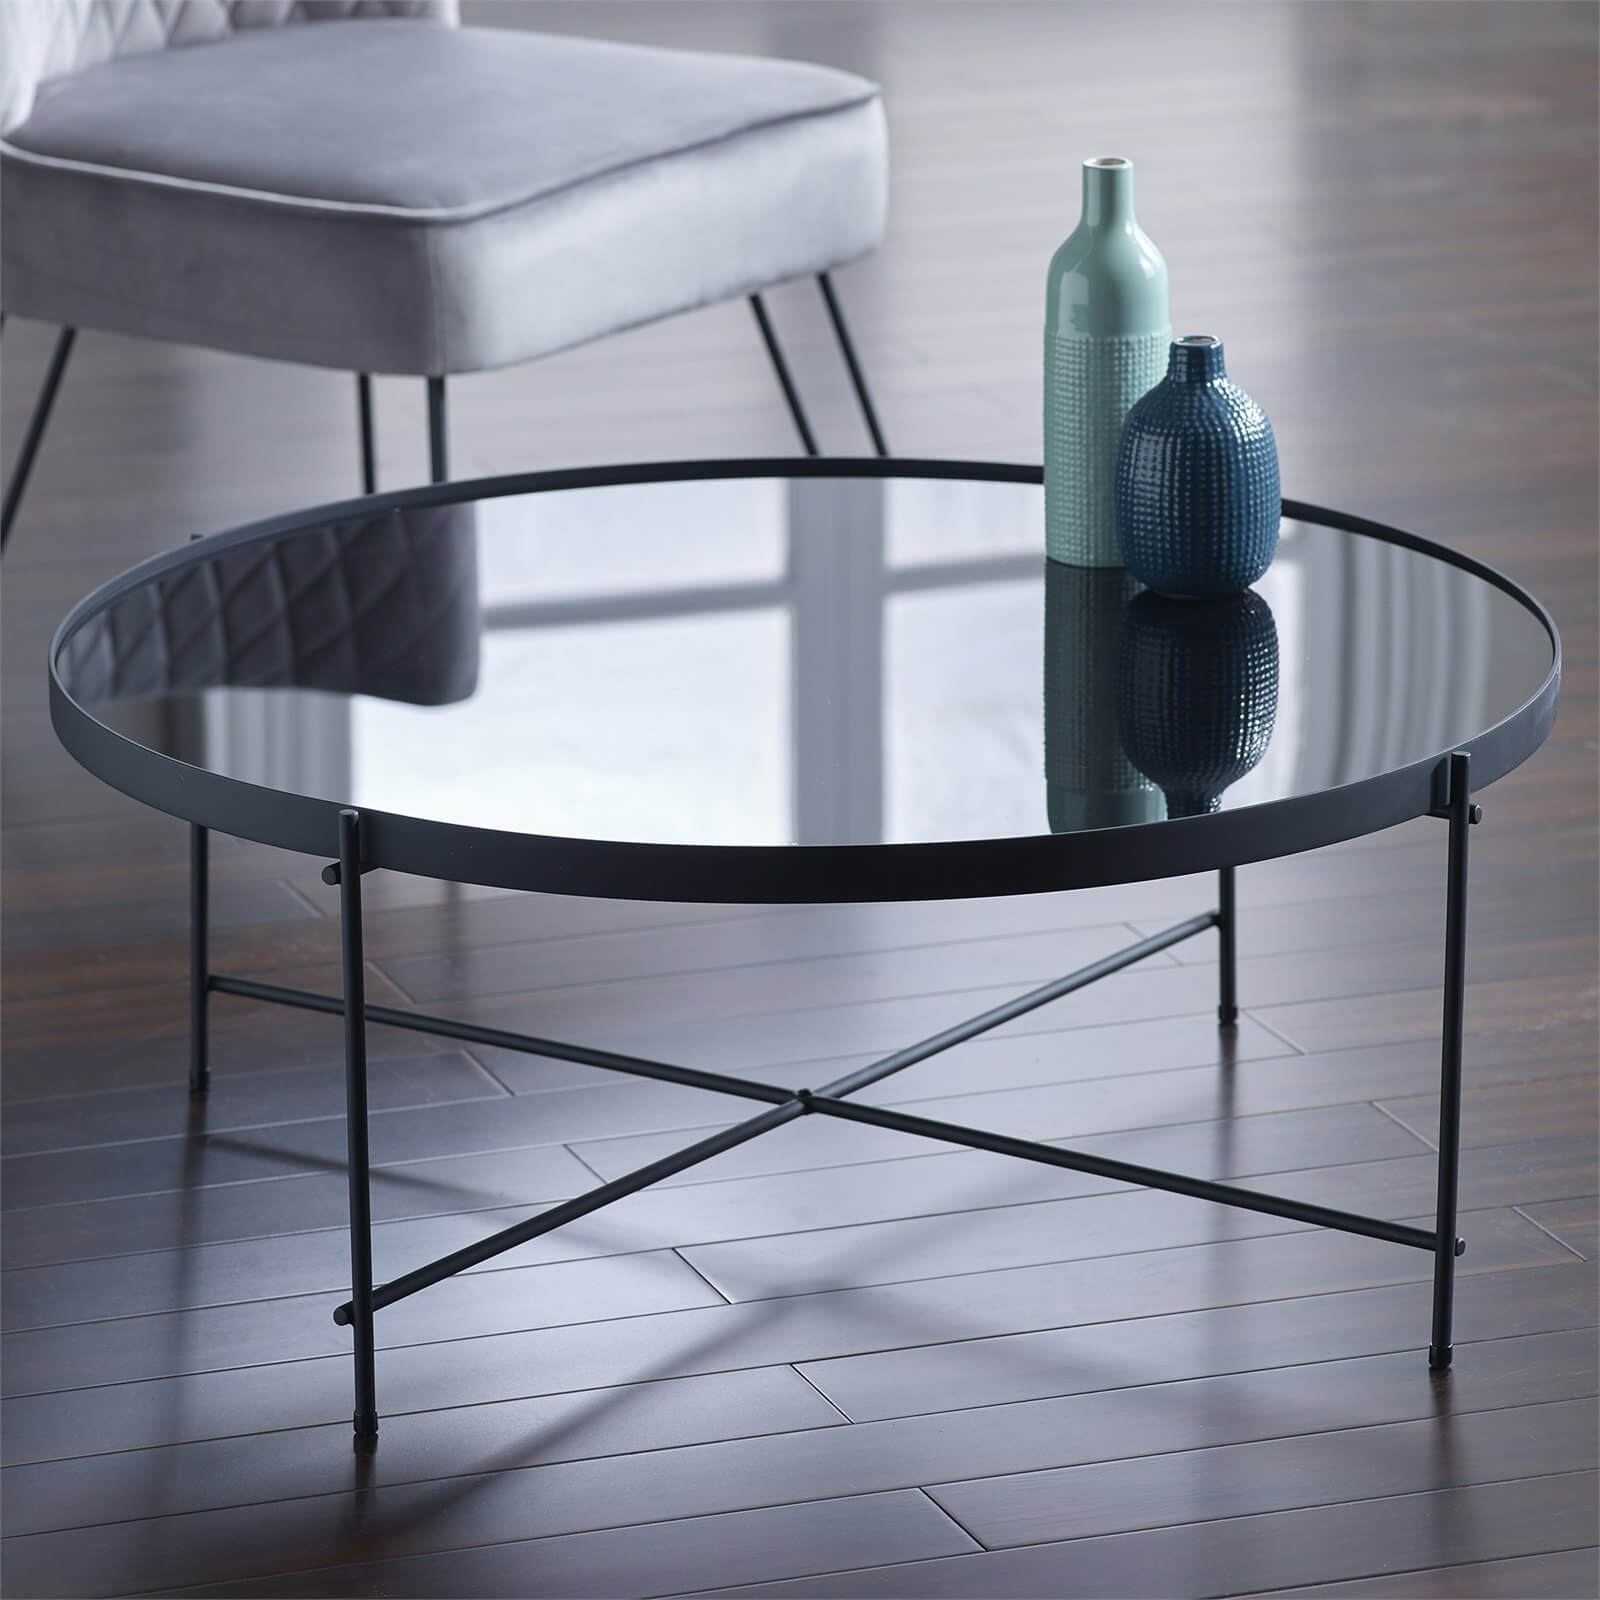 Photo of Oakland Coffee Table - Black